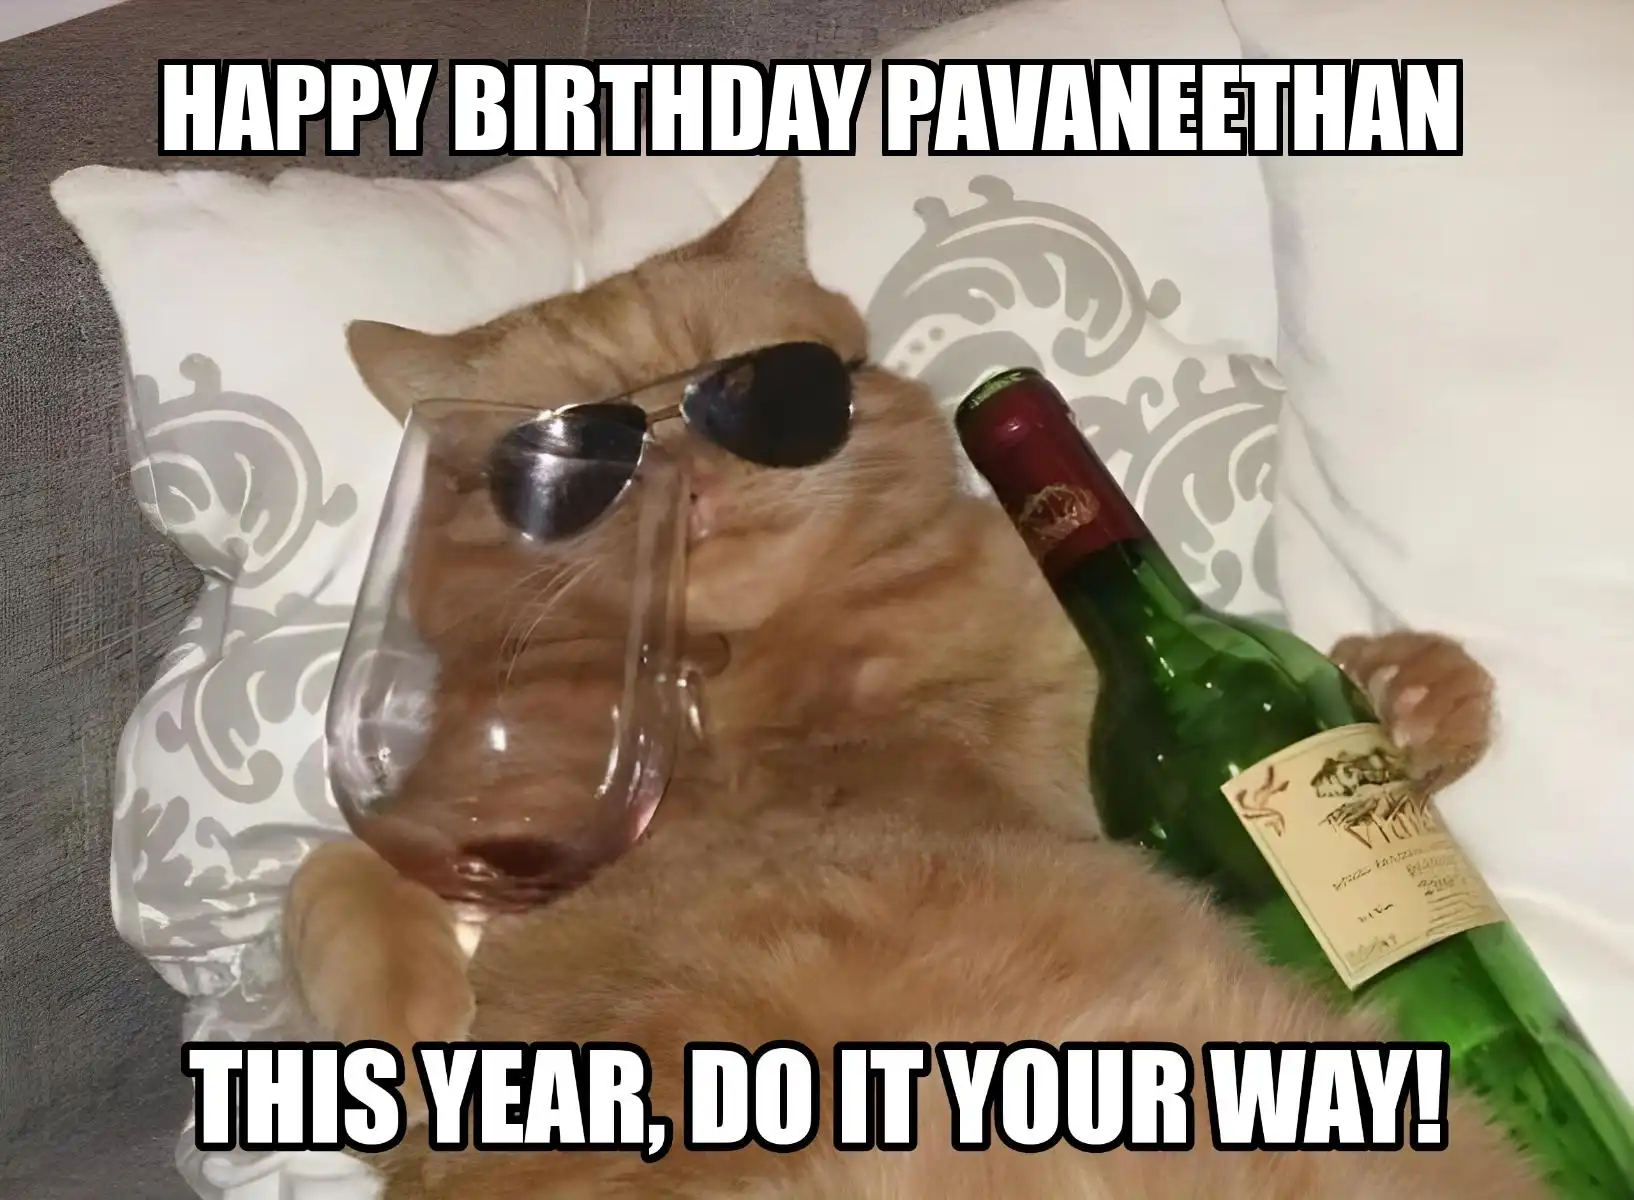 Happy Birthday Pavaneethan This Year Do It Your Way Meme